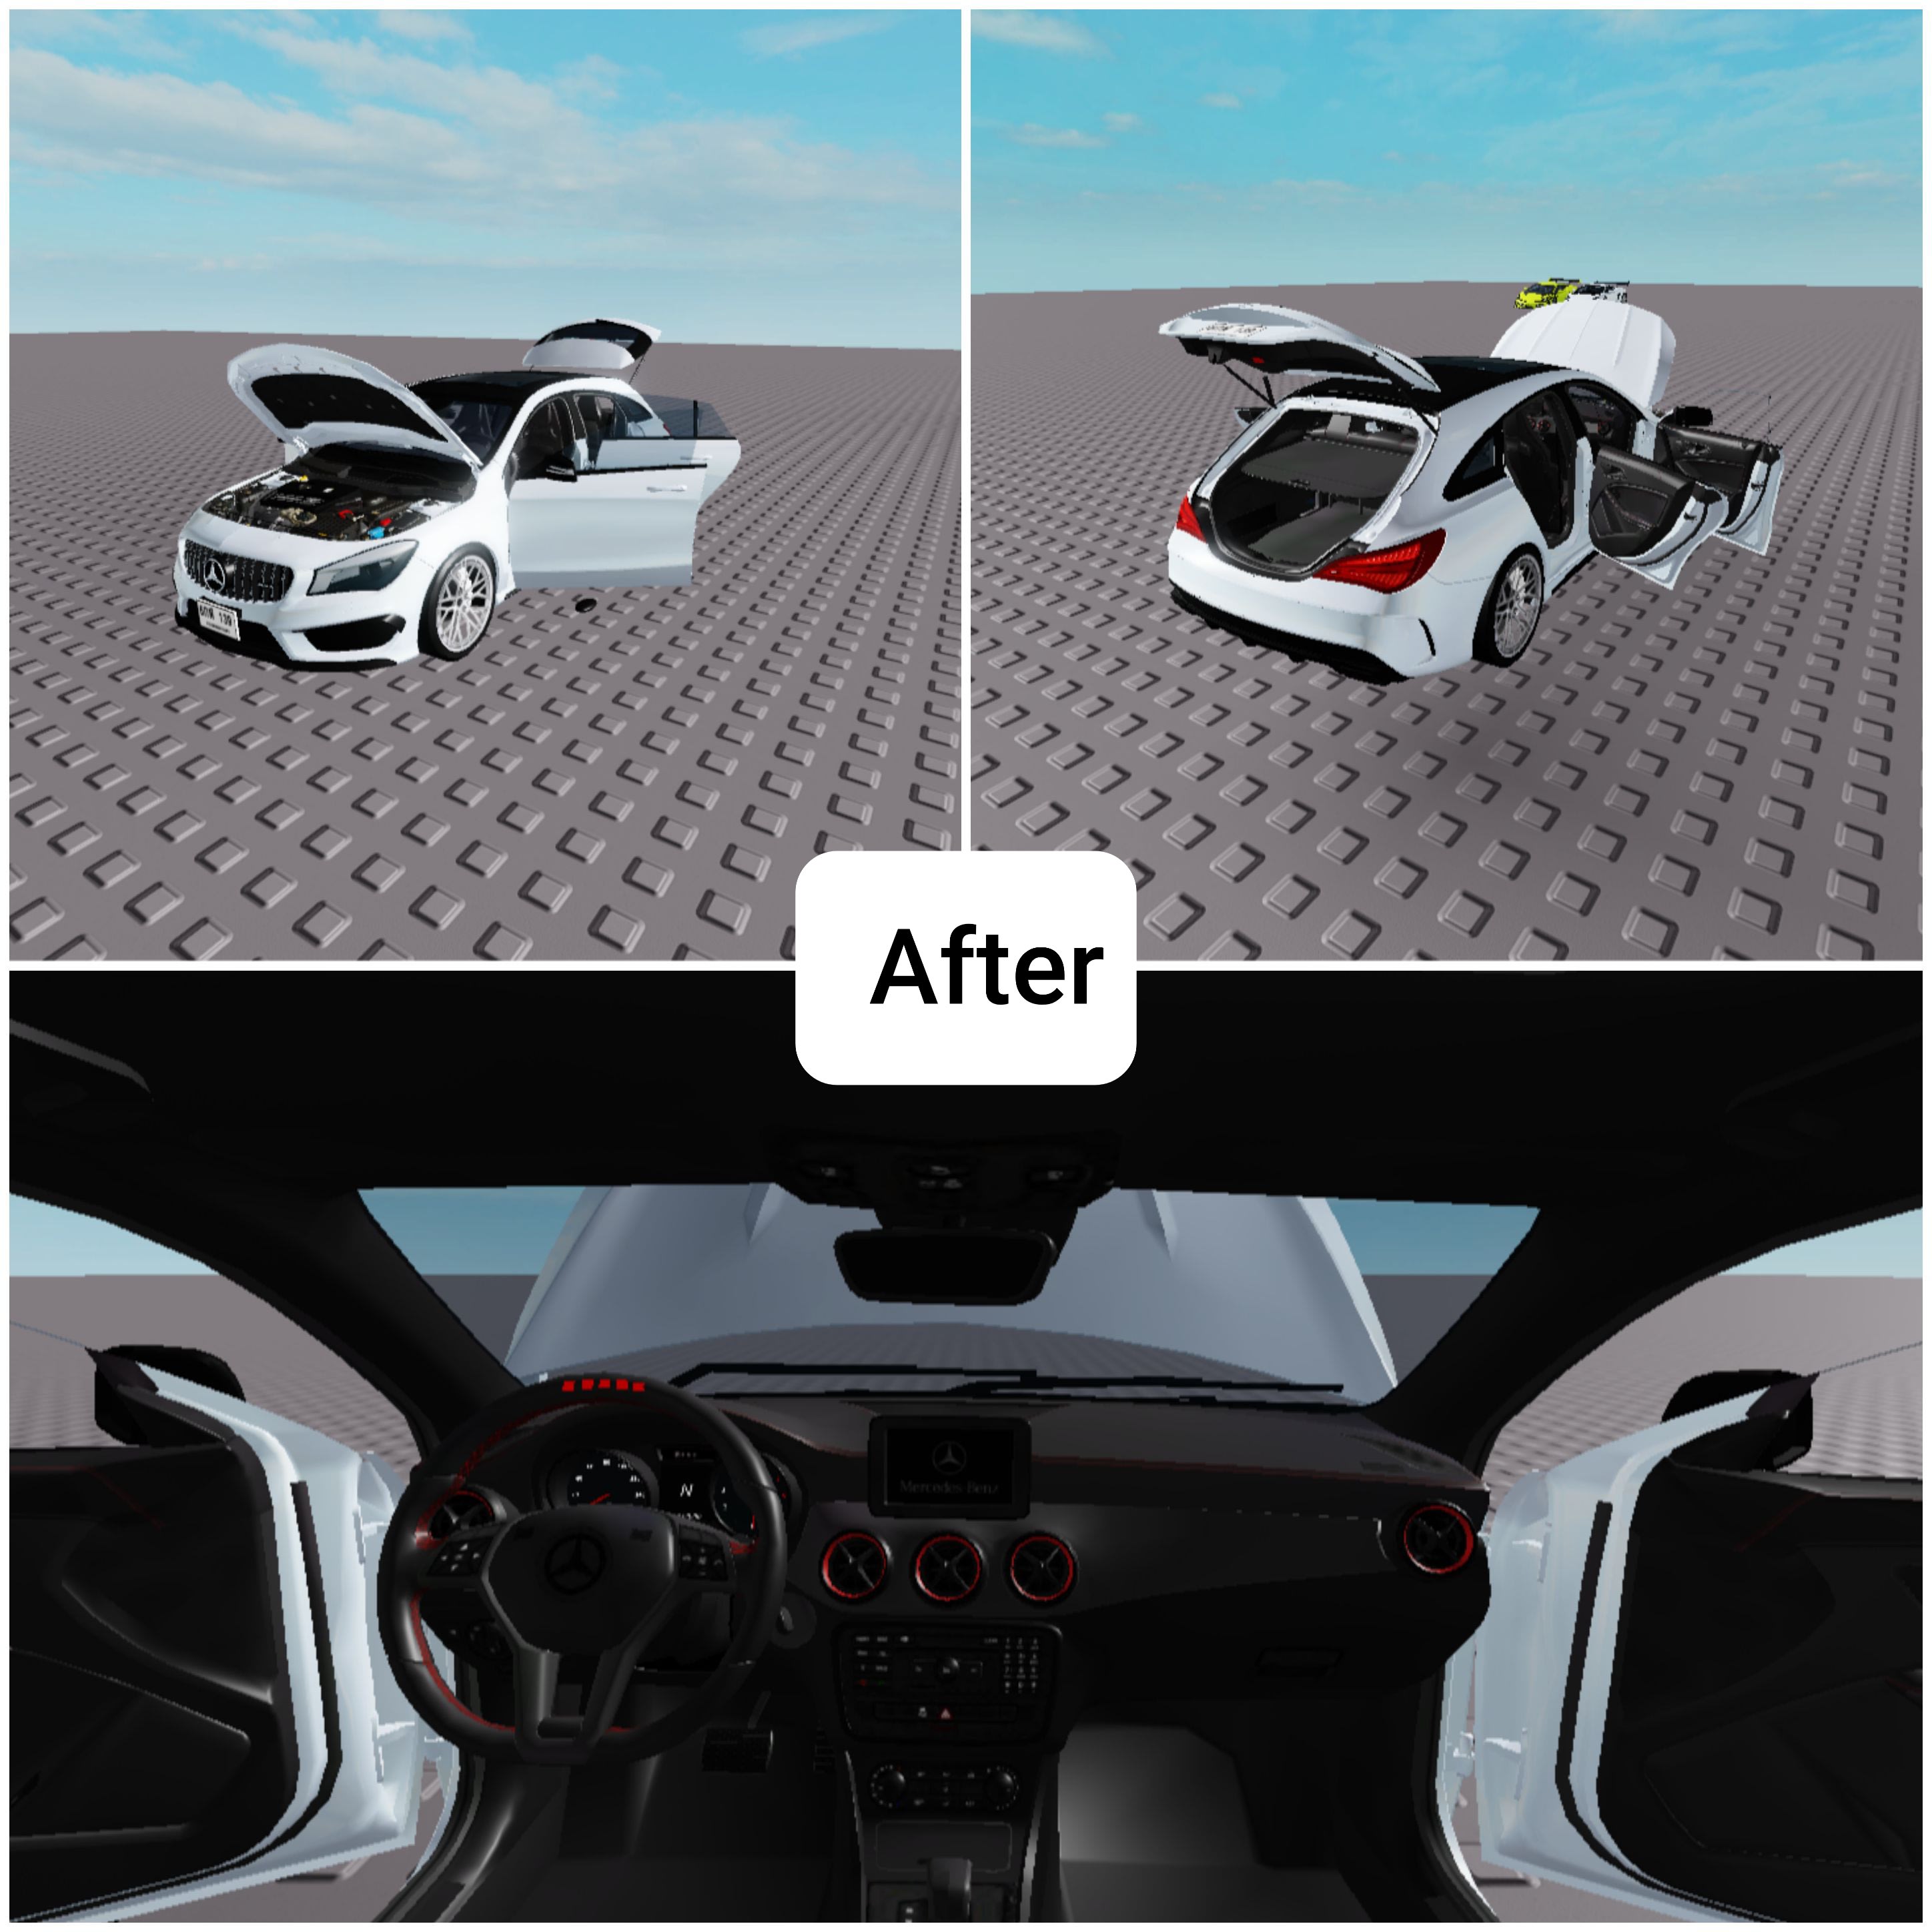 Modify Your Car Model In Roblox Studio With The Specifications You Desire By Sebastian Yeong Fiverr - roblox how to import a script into roblox studio